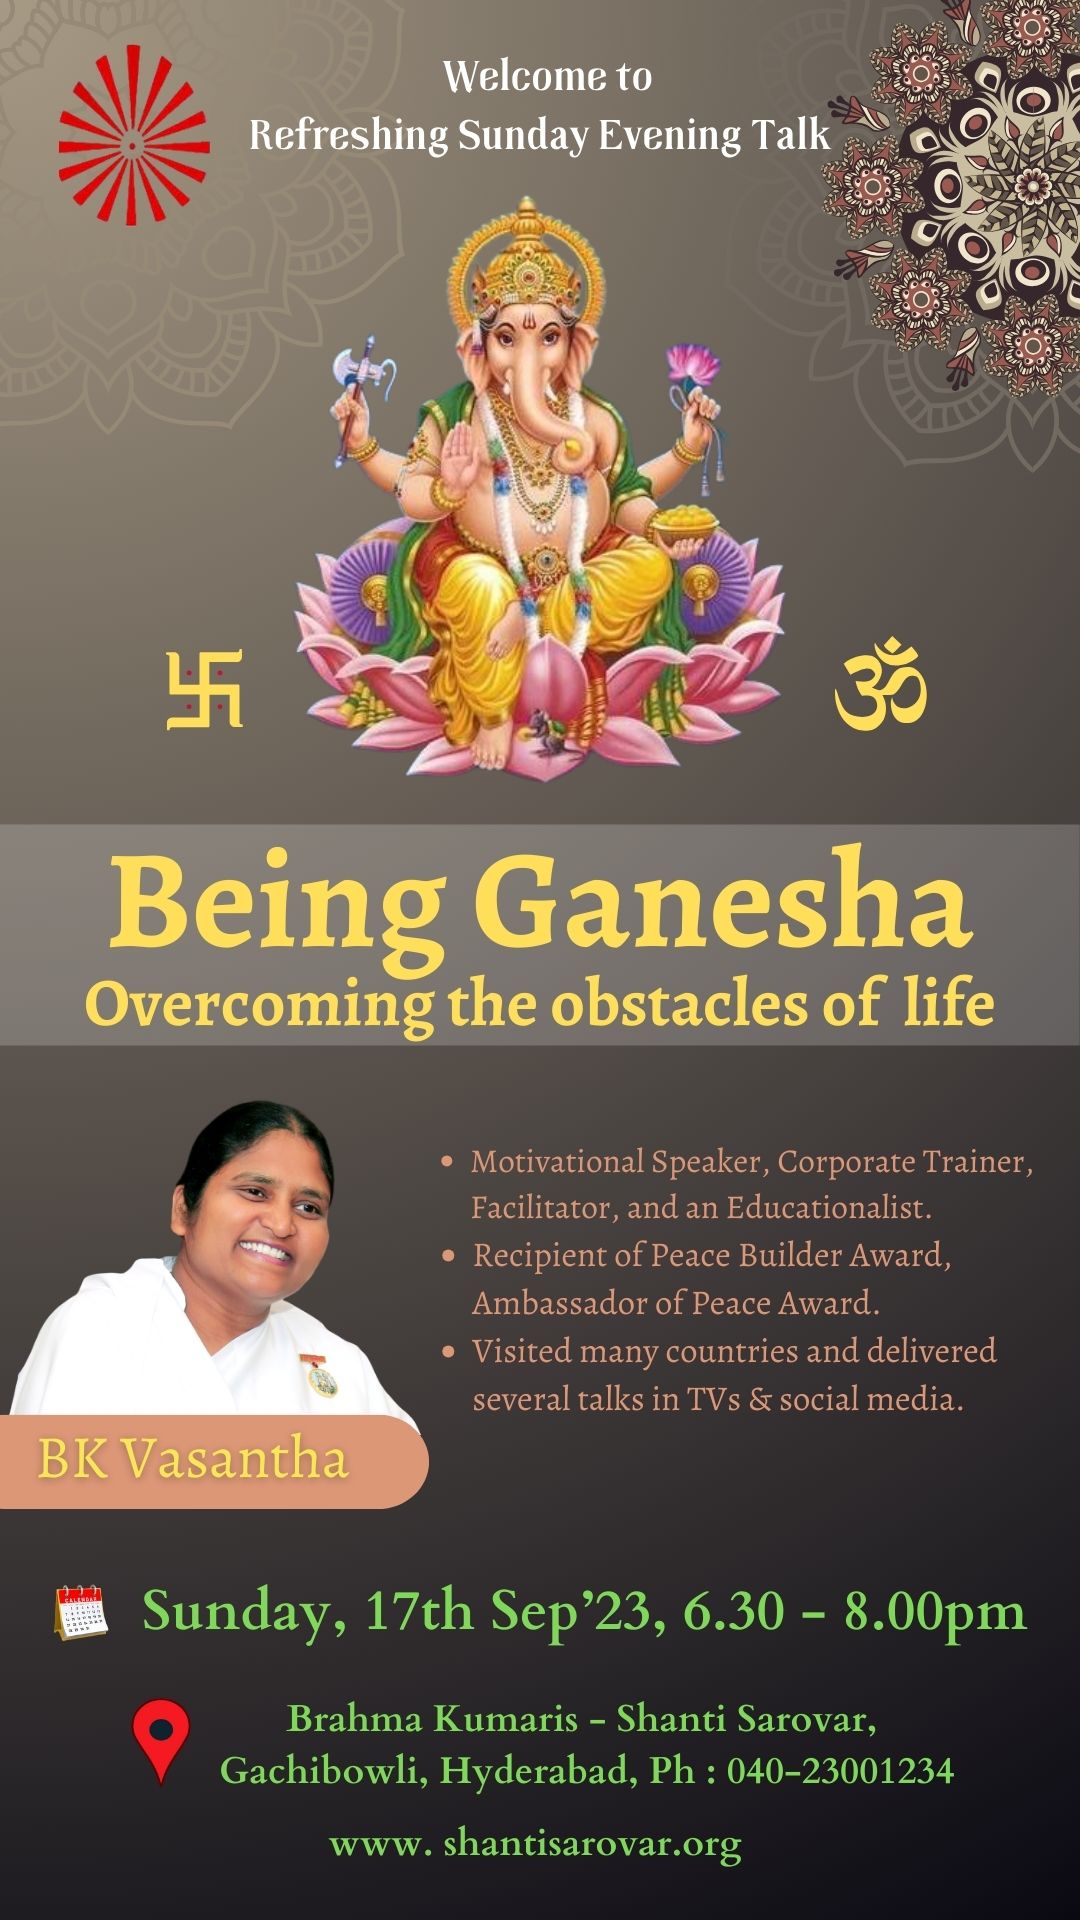 Being ganesha – overcoming the obstacles of life